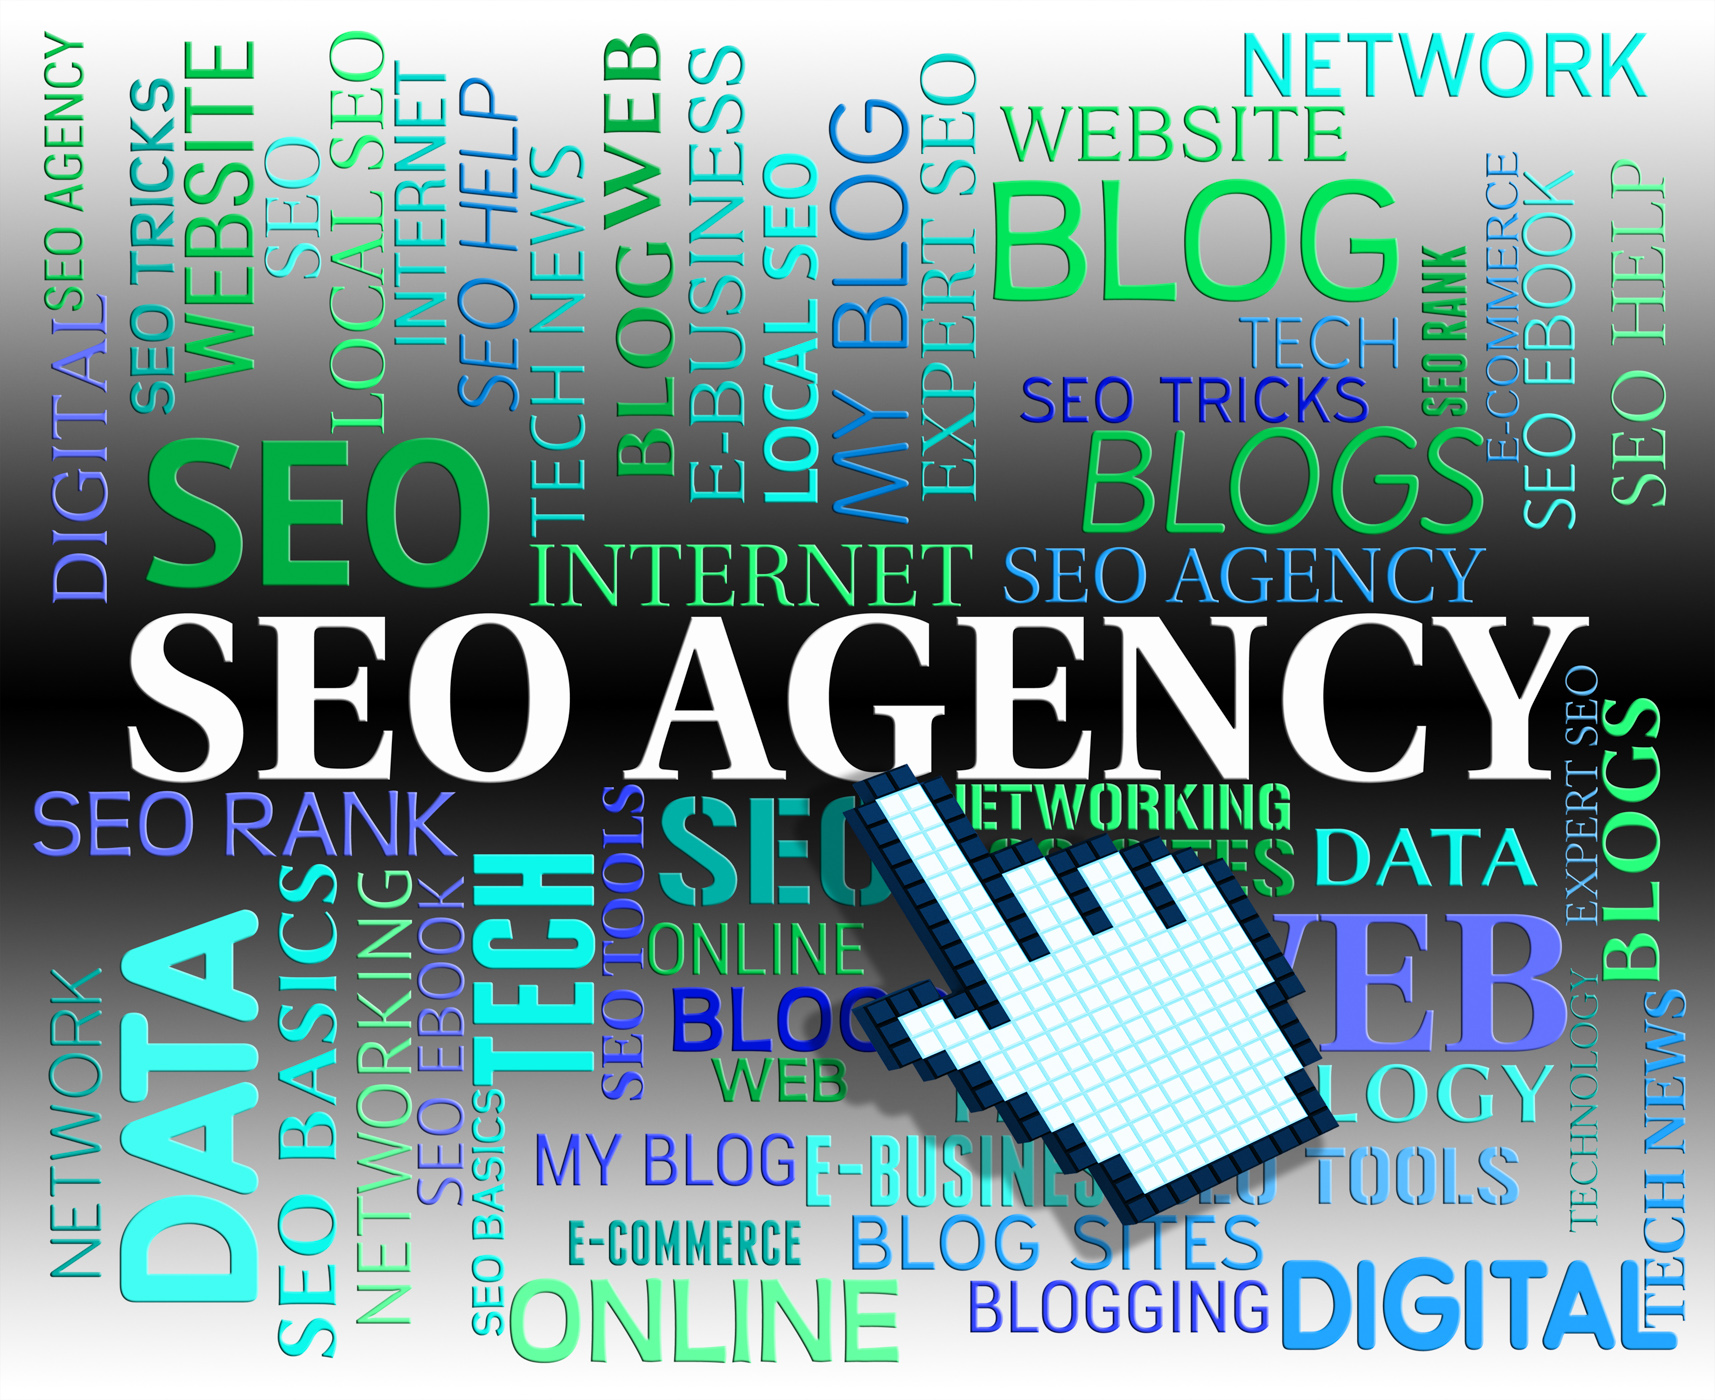 Seo agency indicates web site and agencies photo